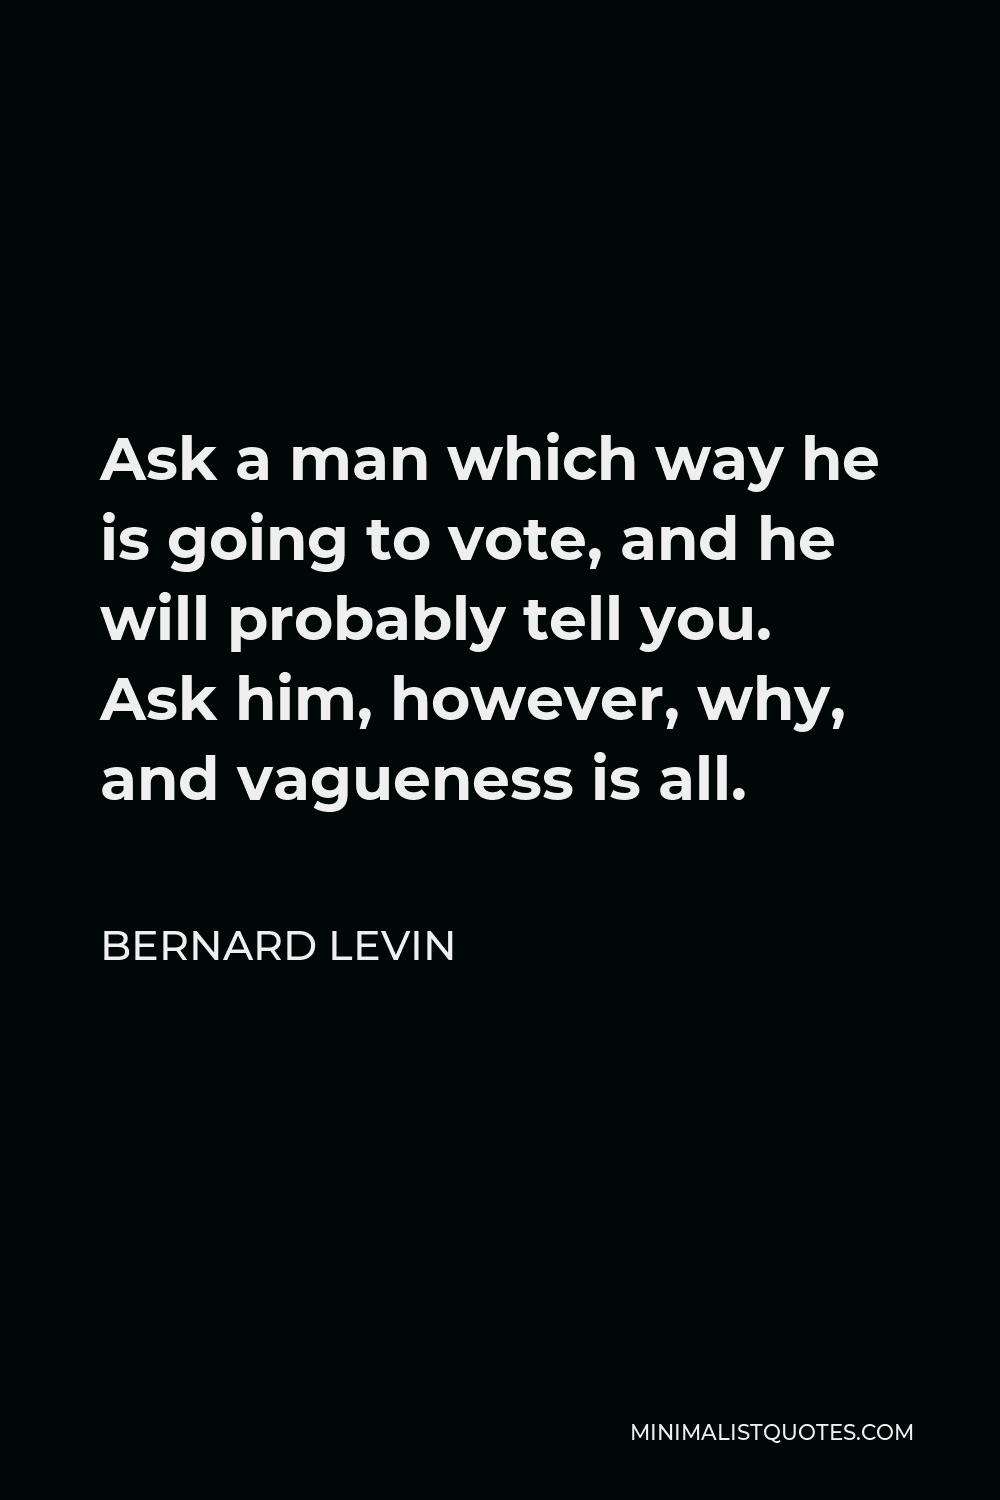 Bernard Levin Quote - Ask a man which way he is going to vote, and he will probably tell you. Ask him, however, why, and vagueness is all.